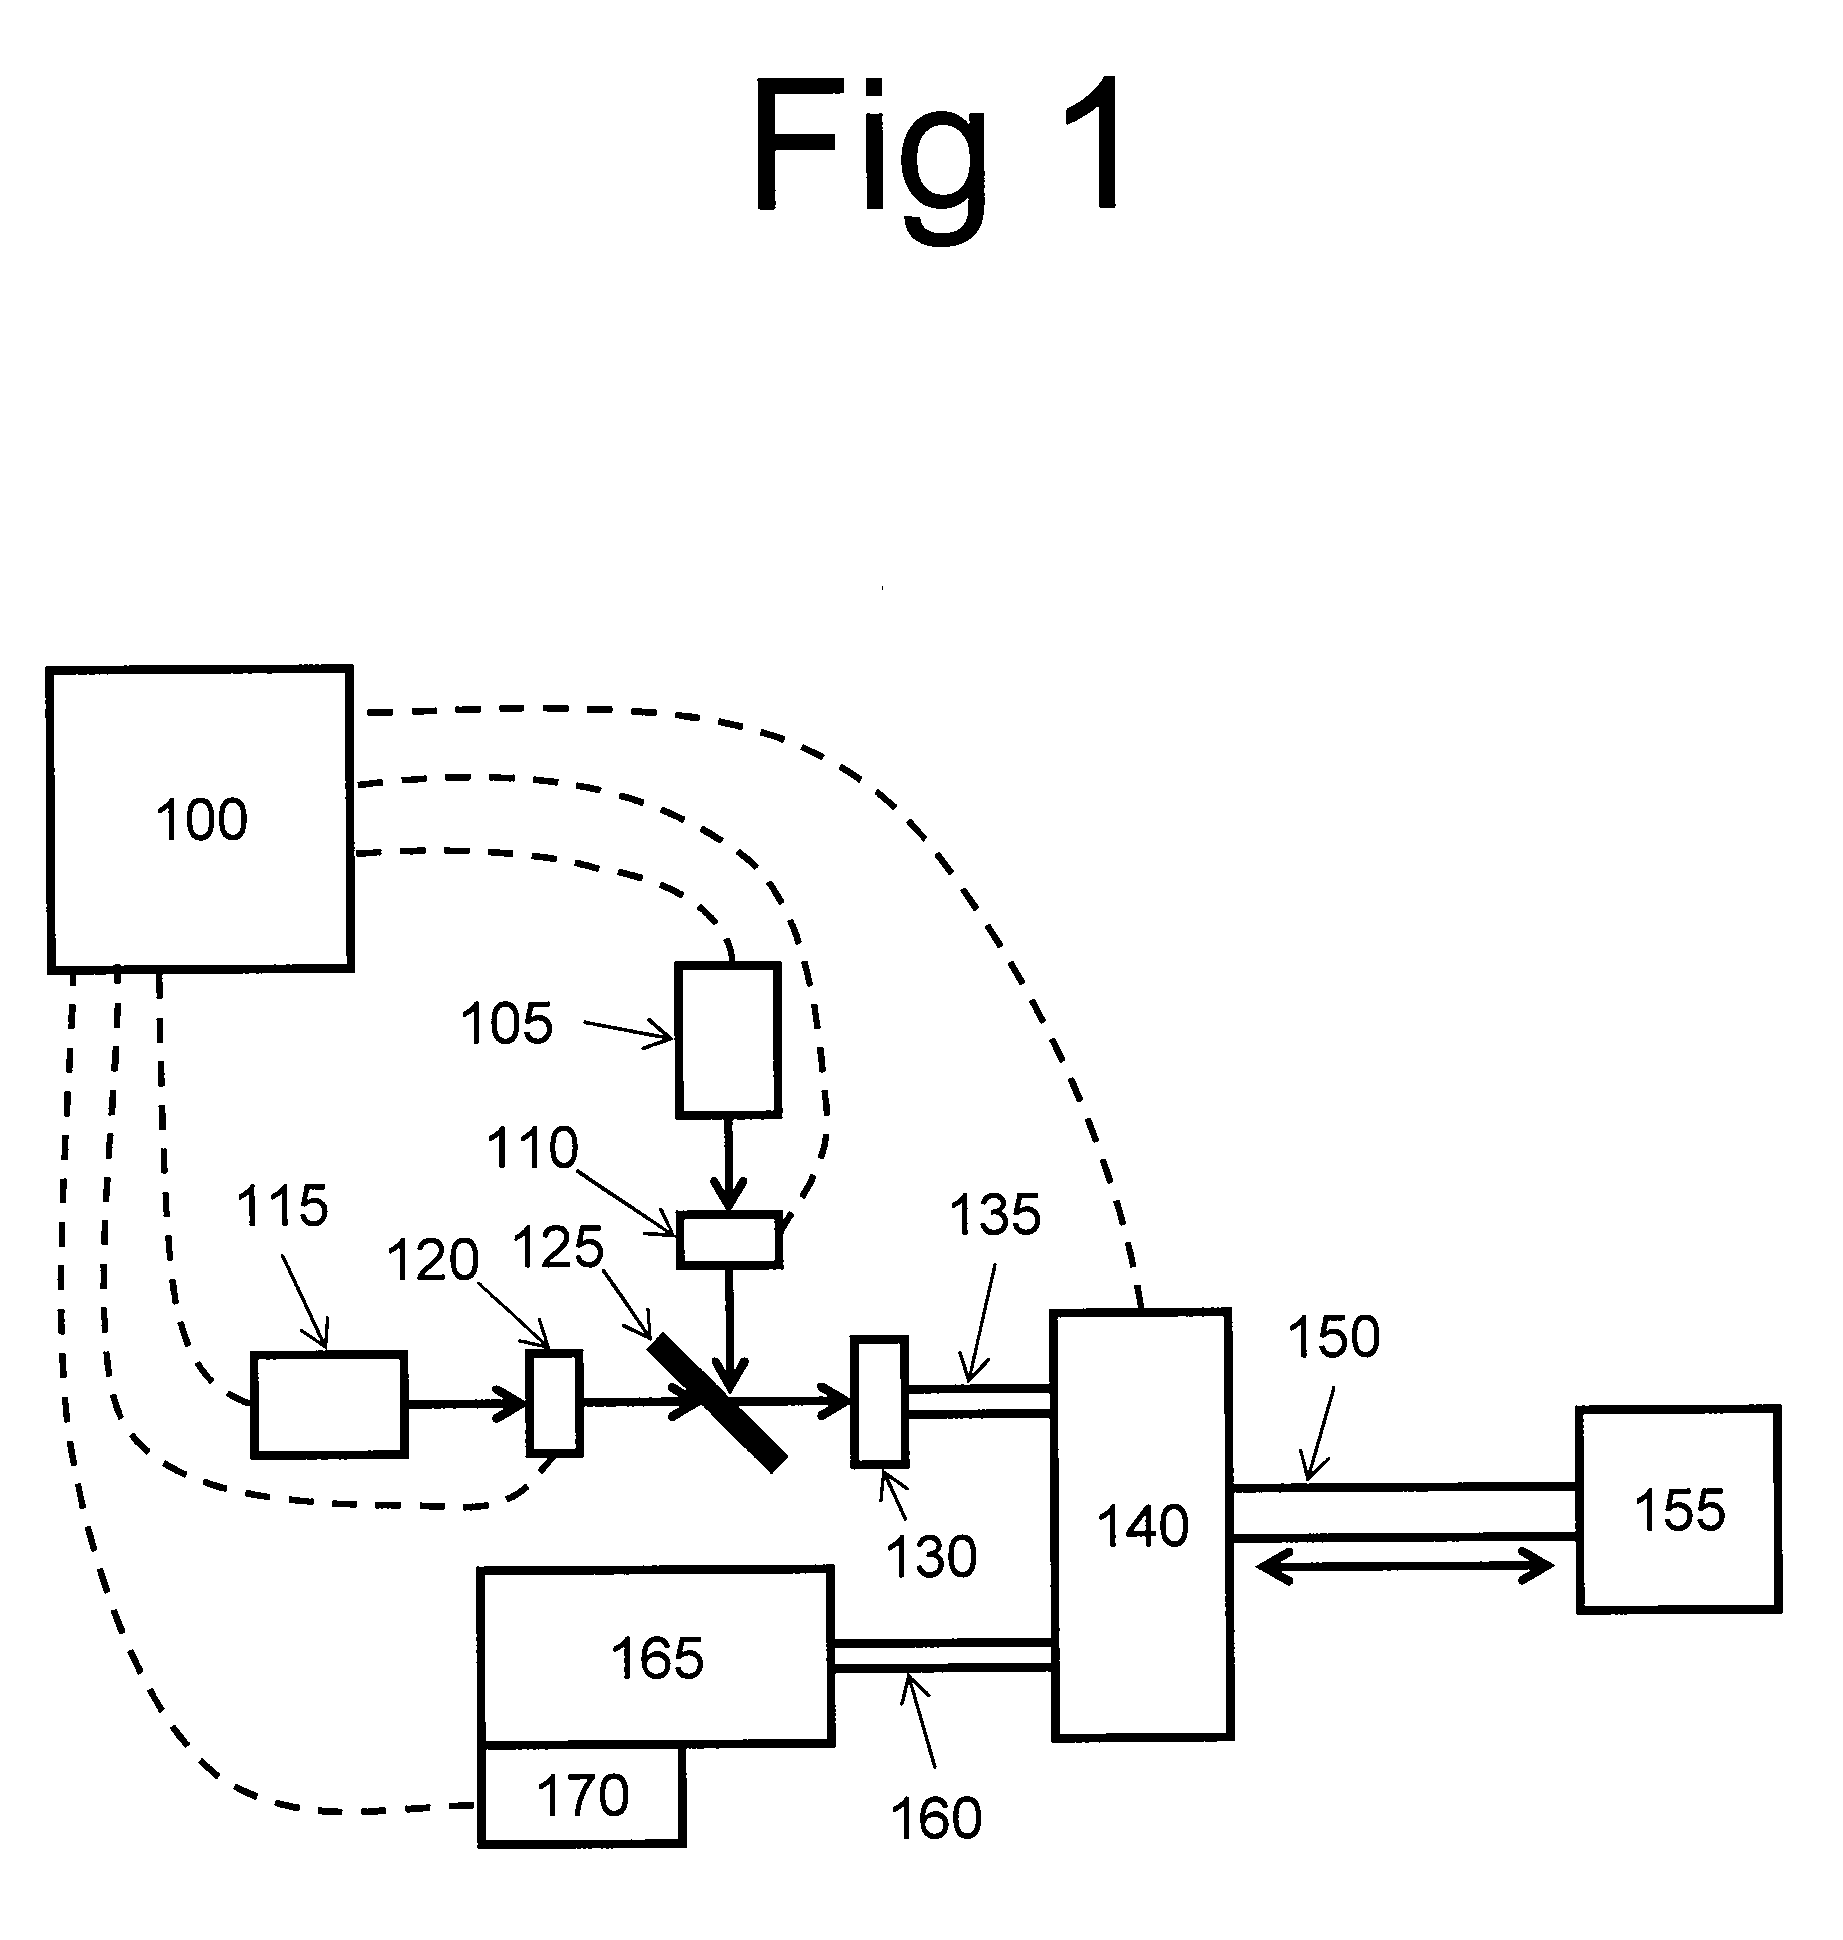 Apparatus, computer-accessible medium and method for measuring chemical and/or molecular compositions of coronary atherosclerotic plaques in anatomical structures